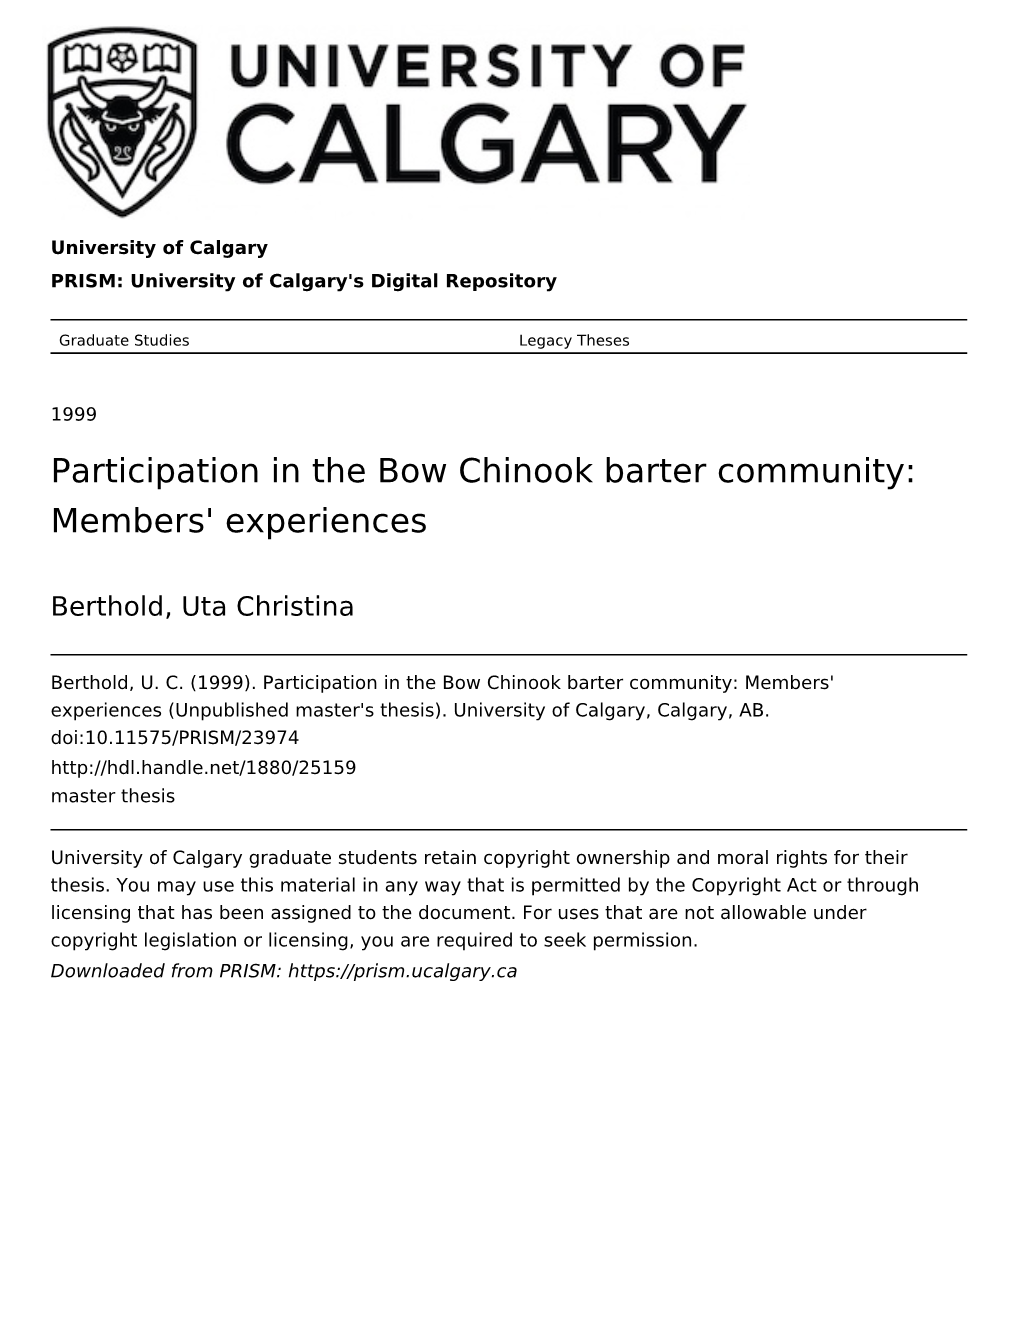 Participation in the Bow Chinook Barter Community: Members' Experiences